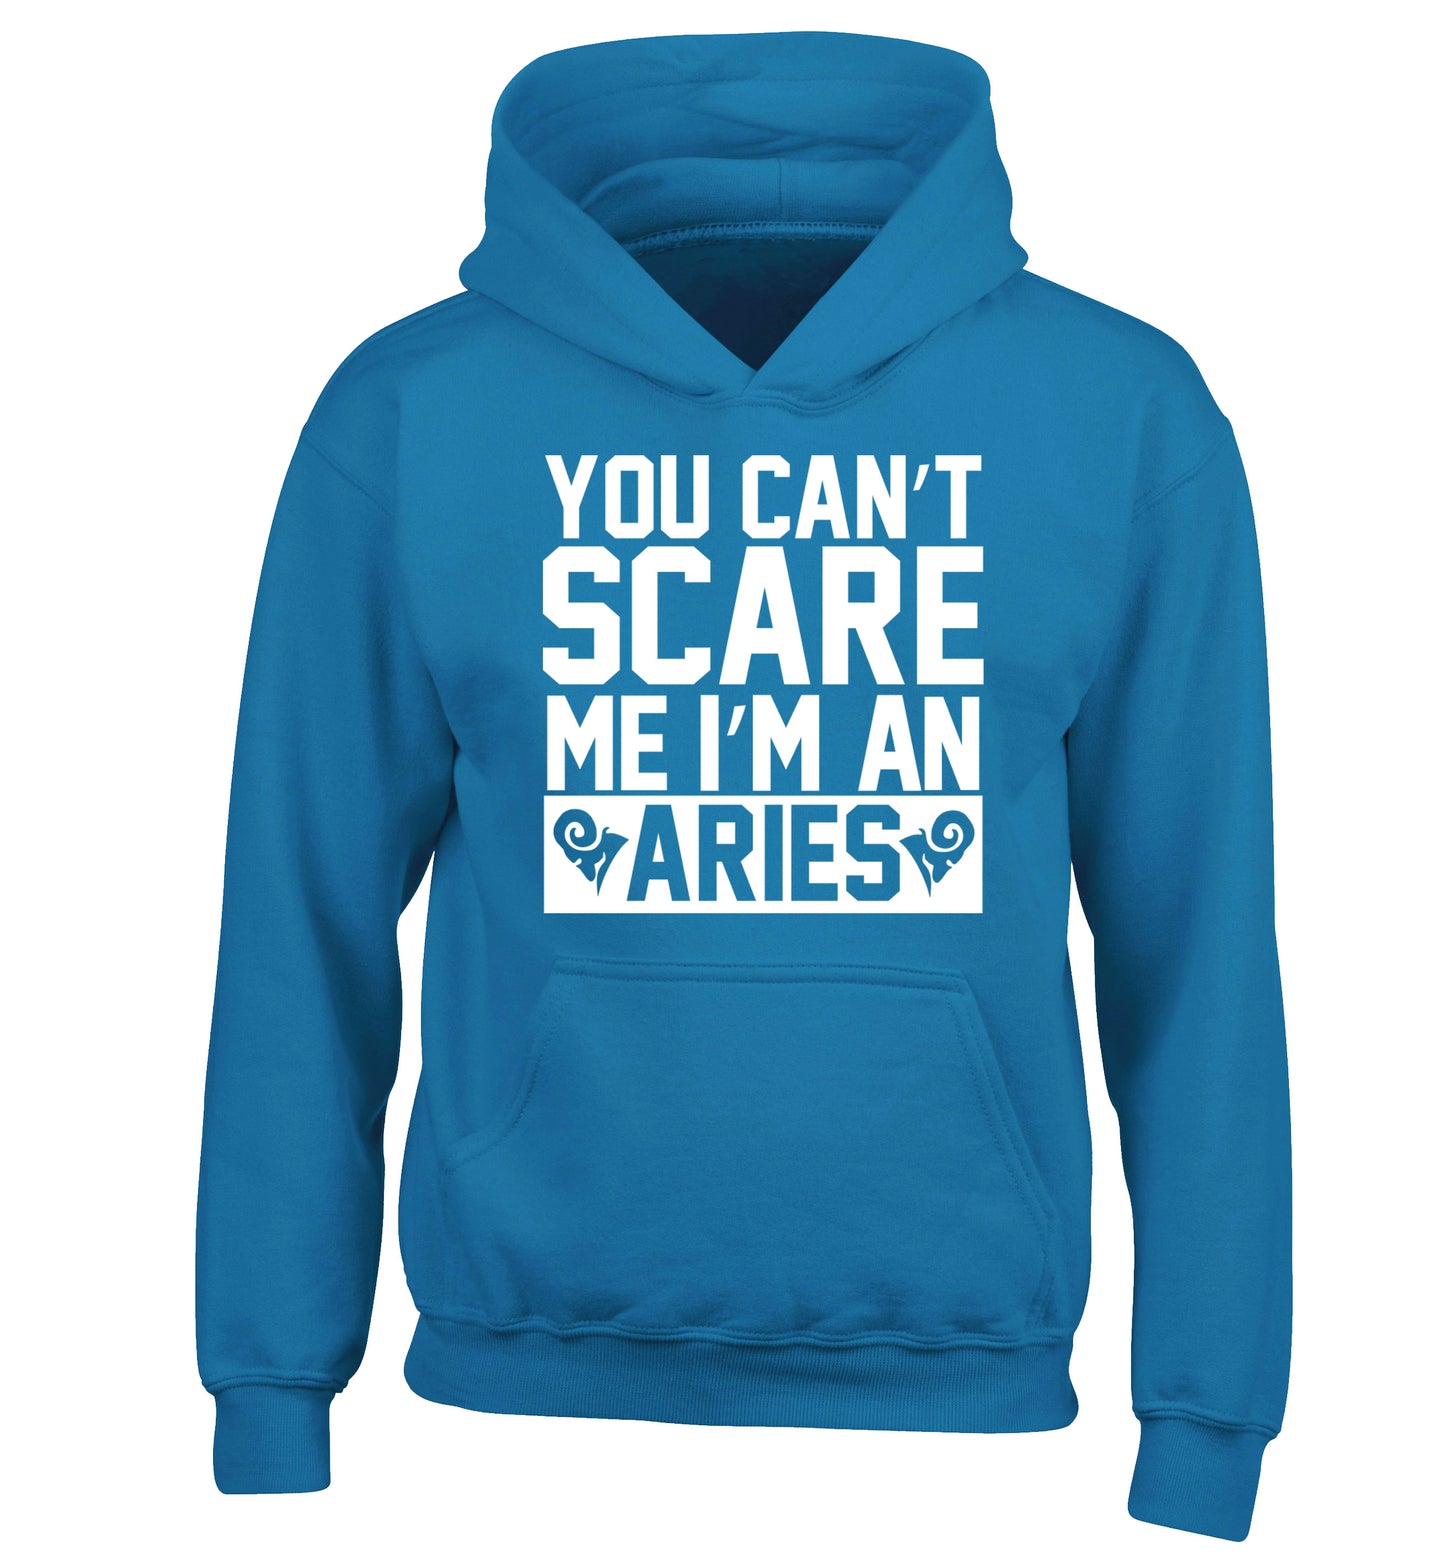 You can't scare me I'm an aries children's blue hoodie 12-13 Years